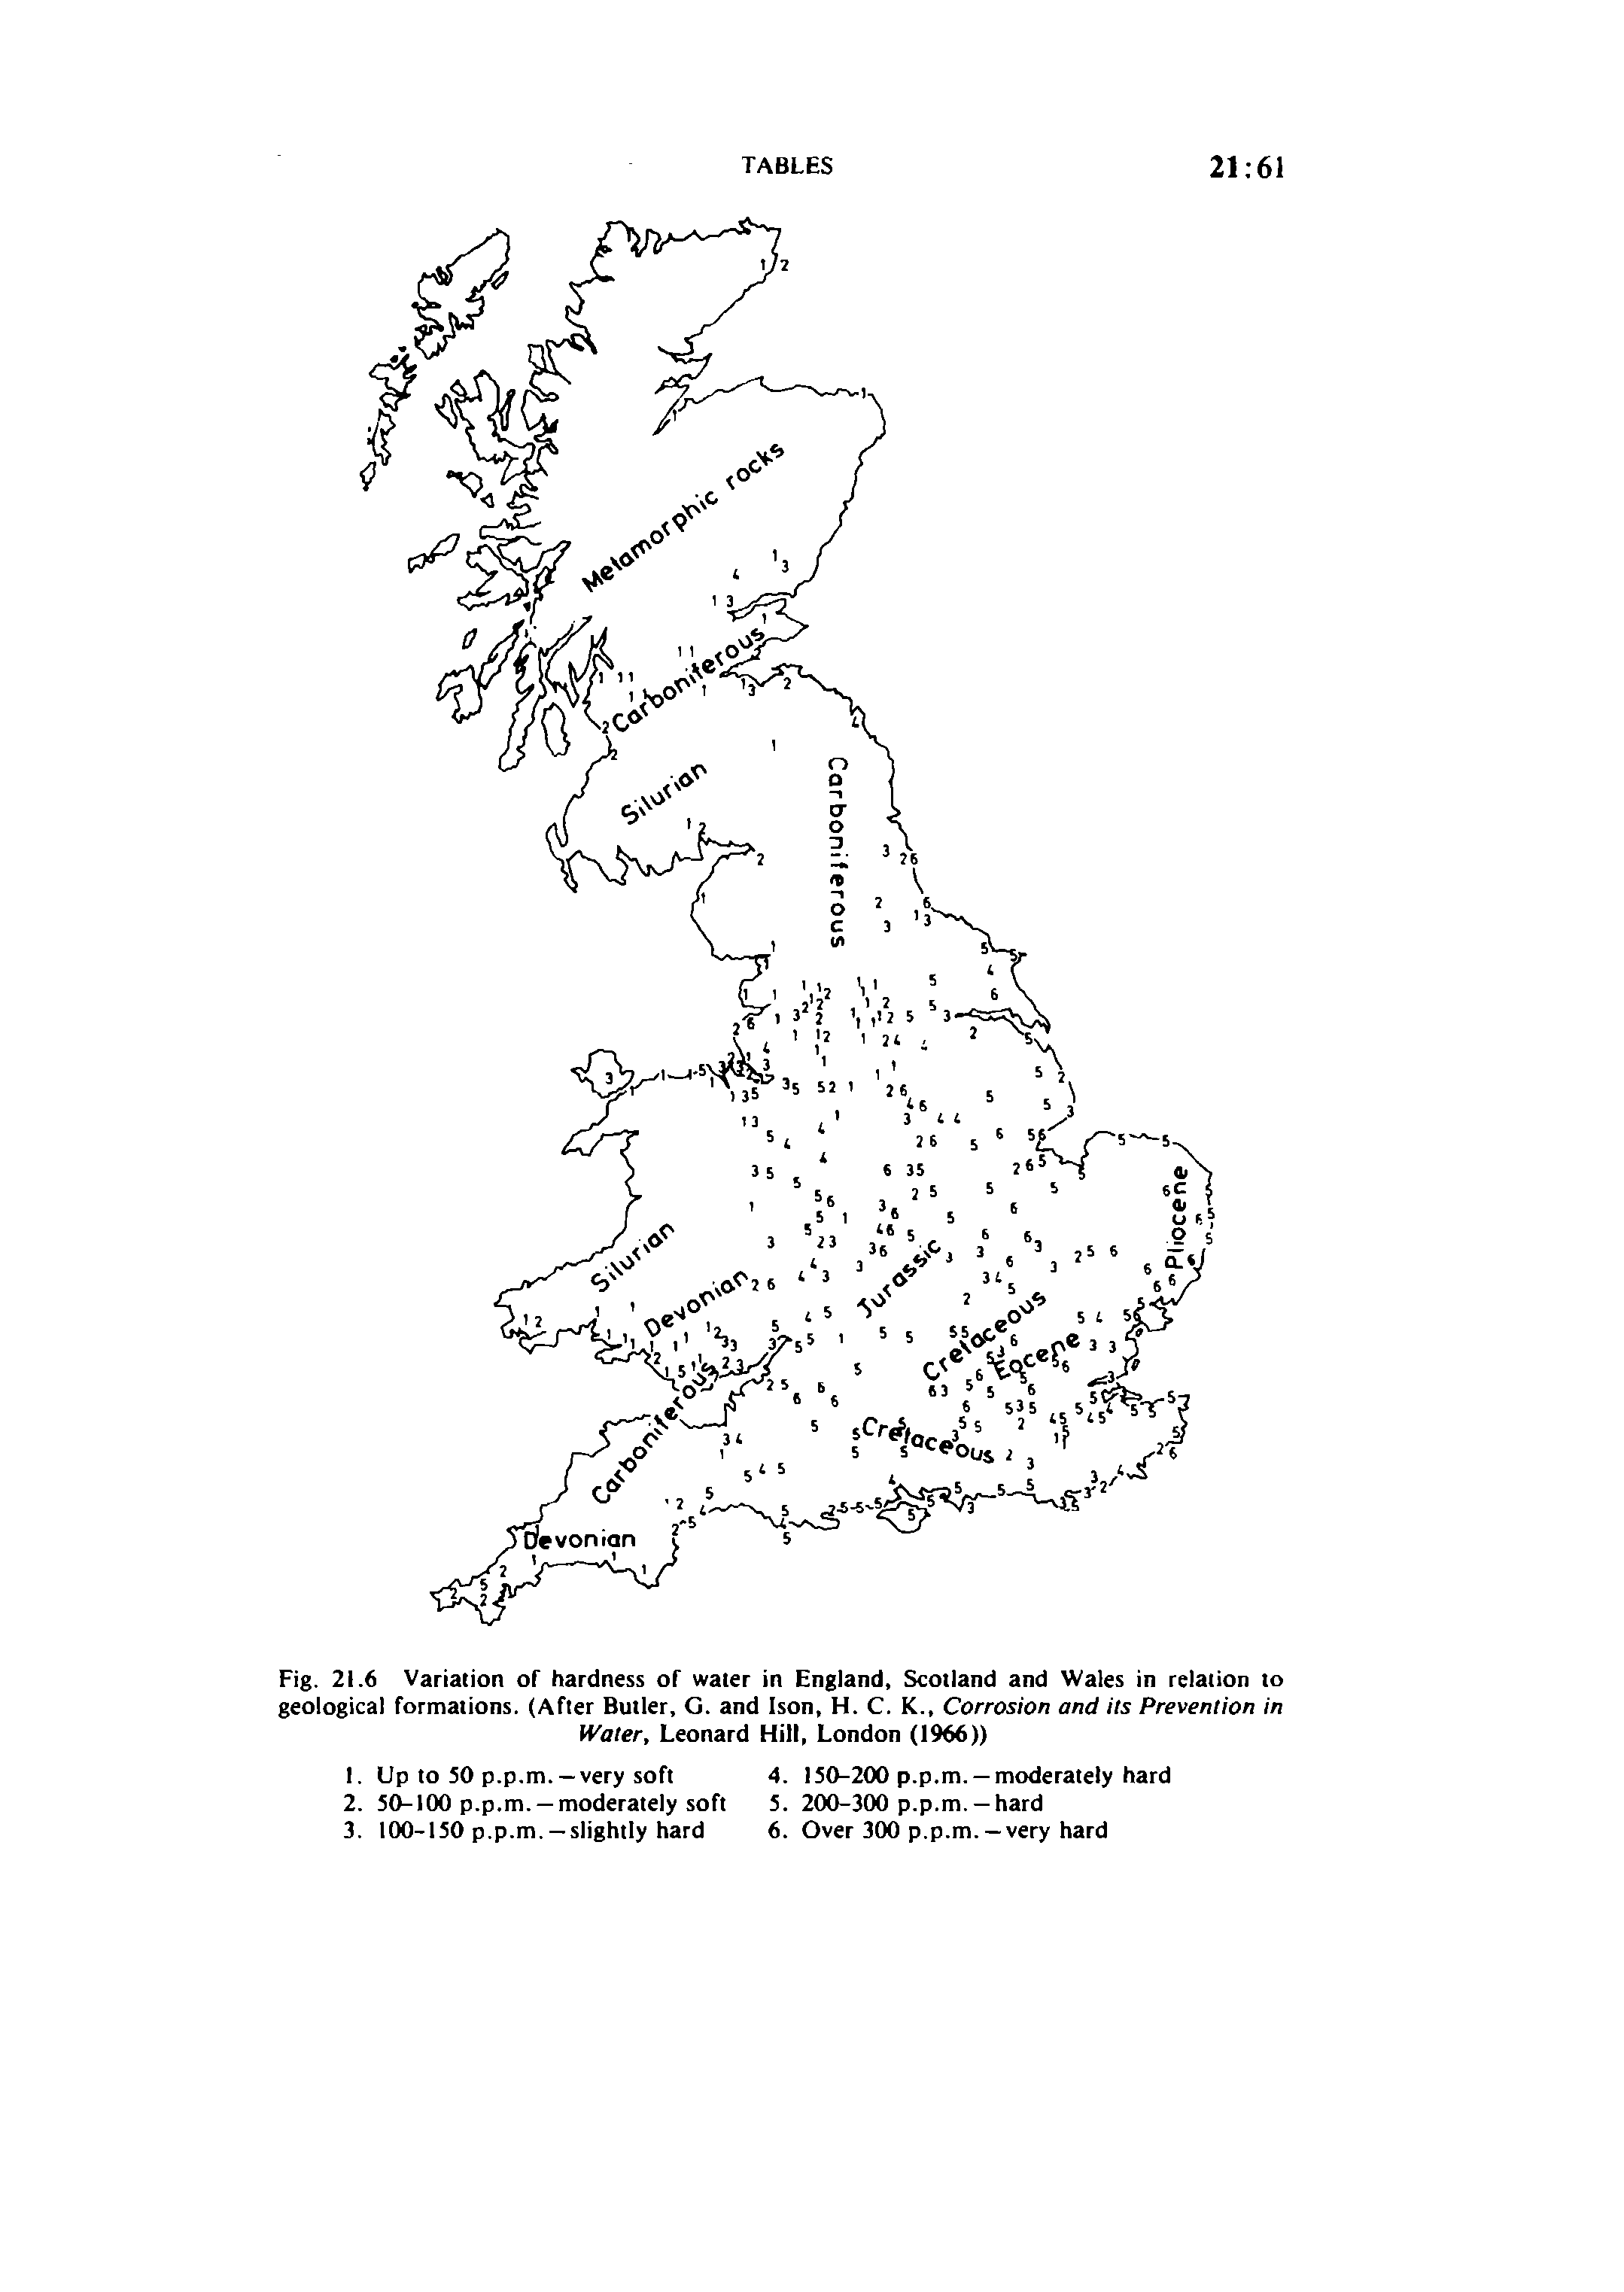 Fig. 21.6 Variation of hardness of water in England, Scotland and Wales in relation to geological formations. (After Butler, G. and Ison, H. C. K., Corrosion and Us Prevention in Water, Leonard Hill, London (1966))...